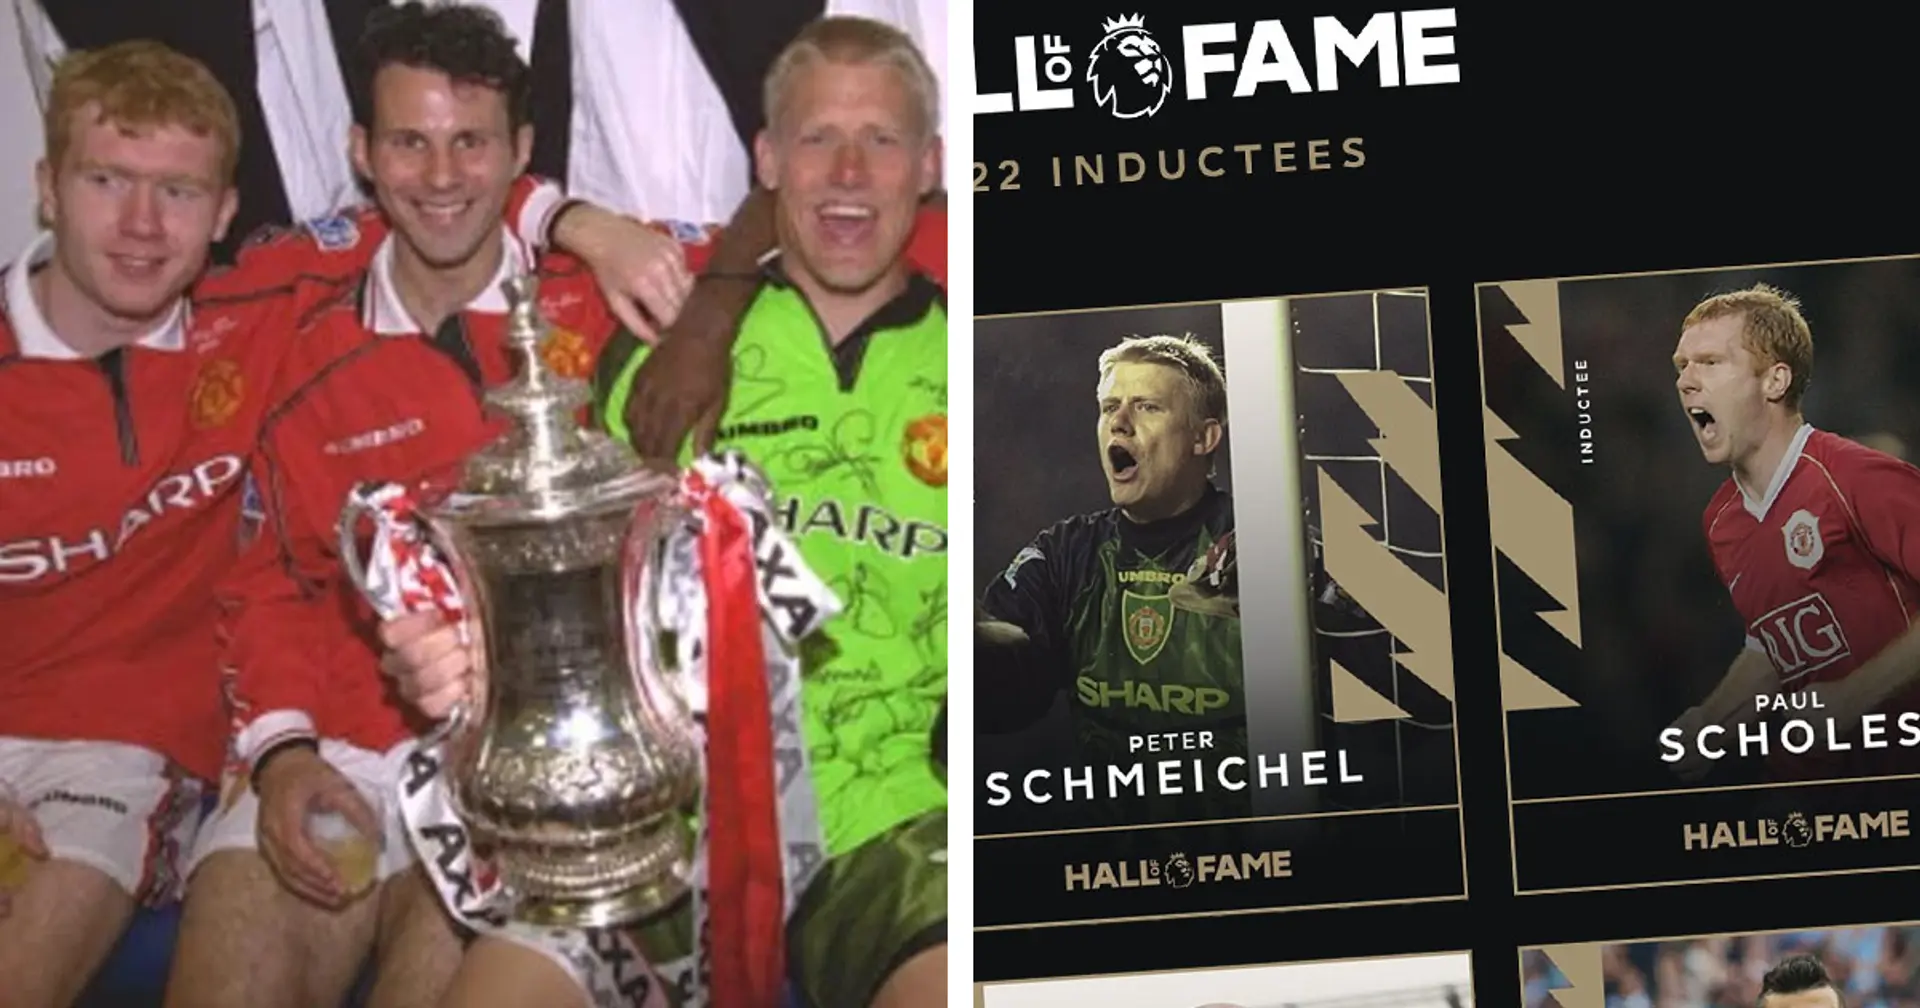 OFFICIAL: Paul Scholes and Peter Schmeichel inducted to Premier League Hall of Fame